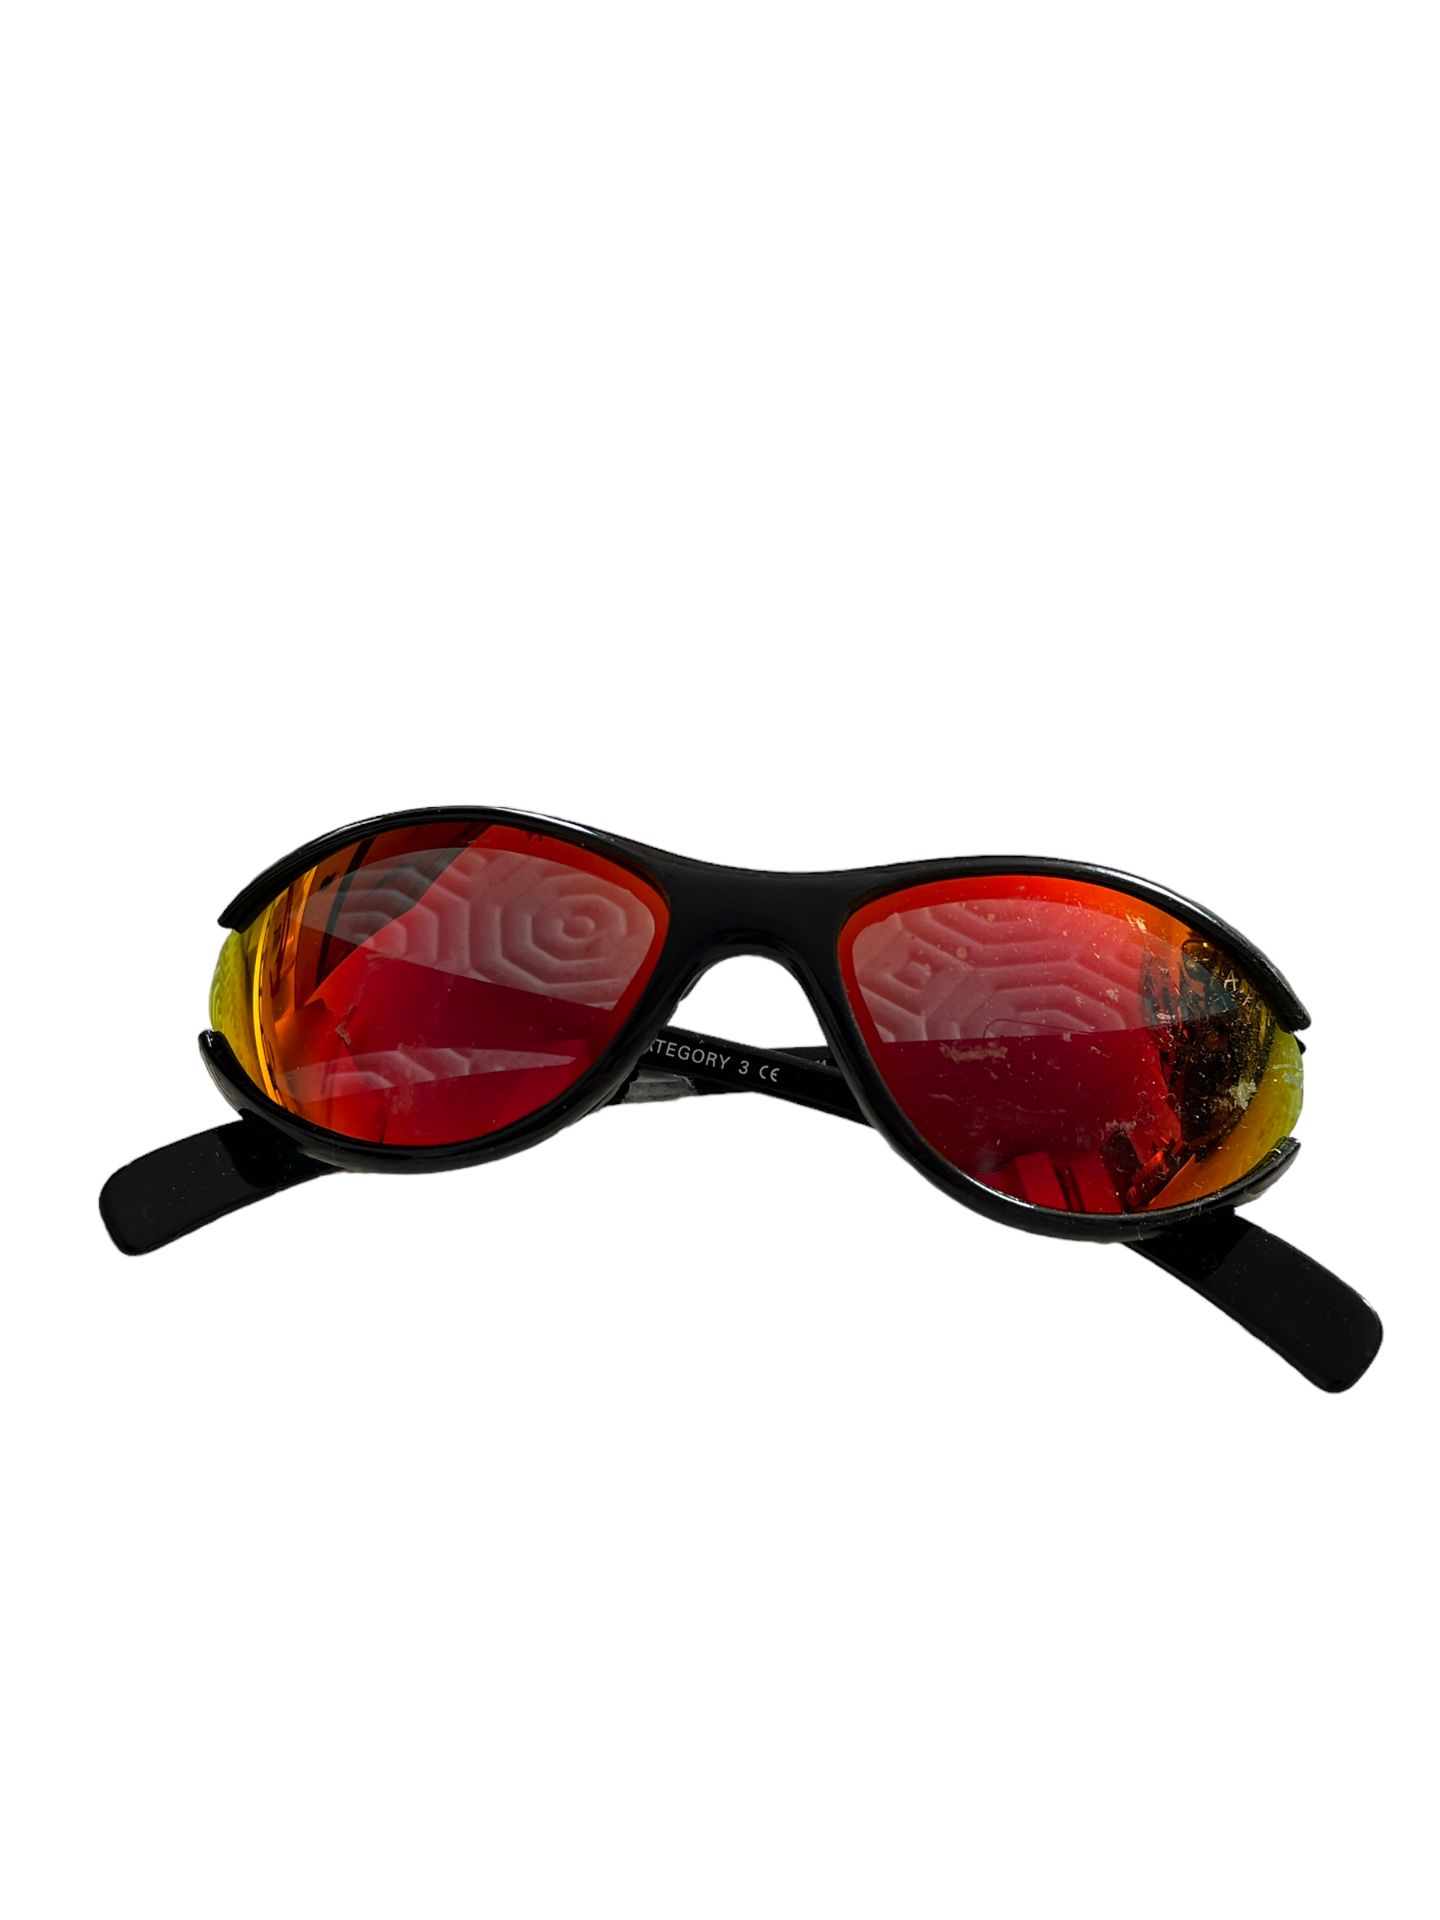 Apex Glasses with case RR£38.00 surplus stock - Image 4 of 4